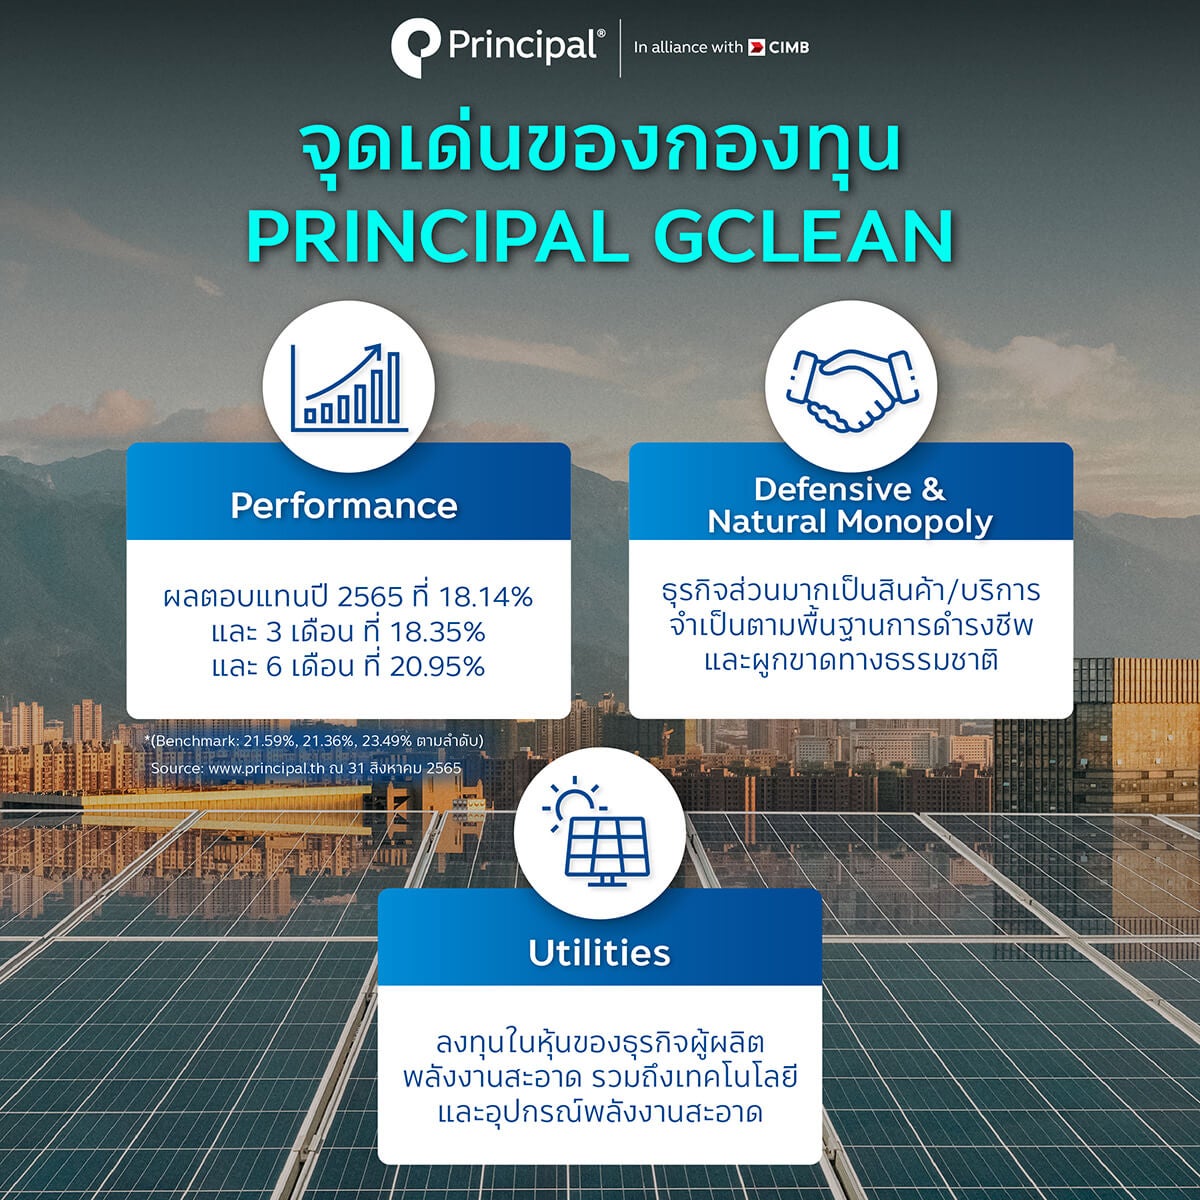 GCLEAN theme investment